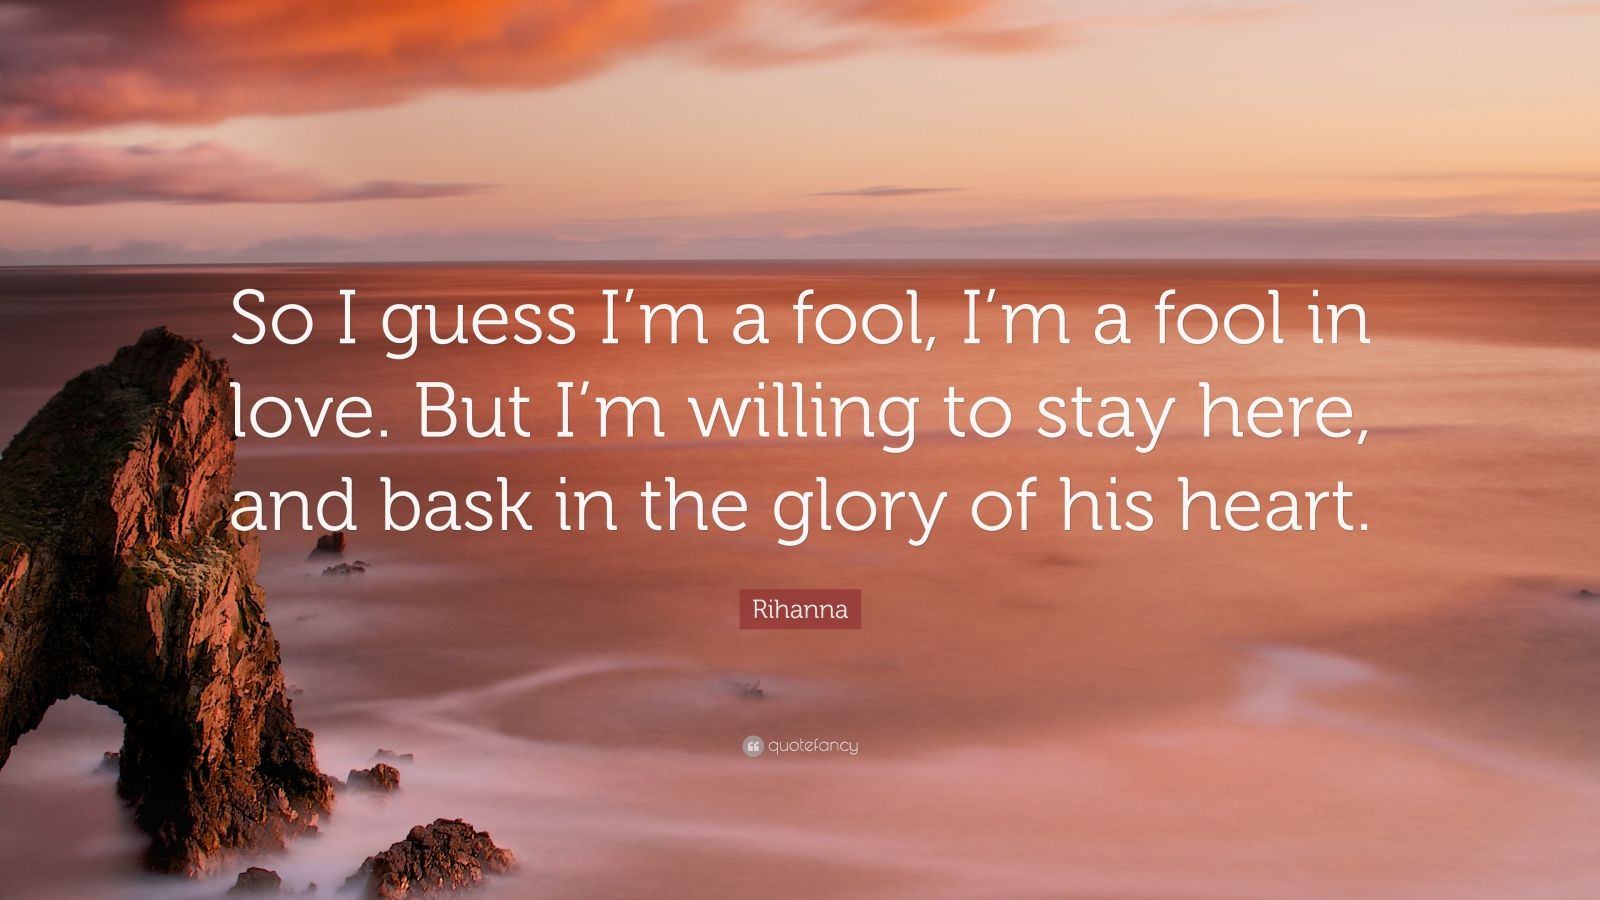 Rihanna Quote: "So I guess I'm a fool, I'm a fool in love. But I'm willing to stay here, and ...